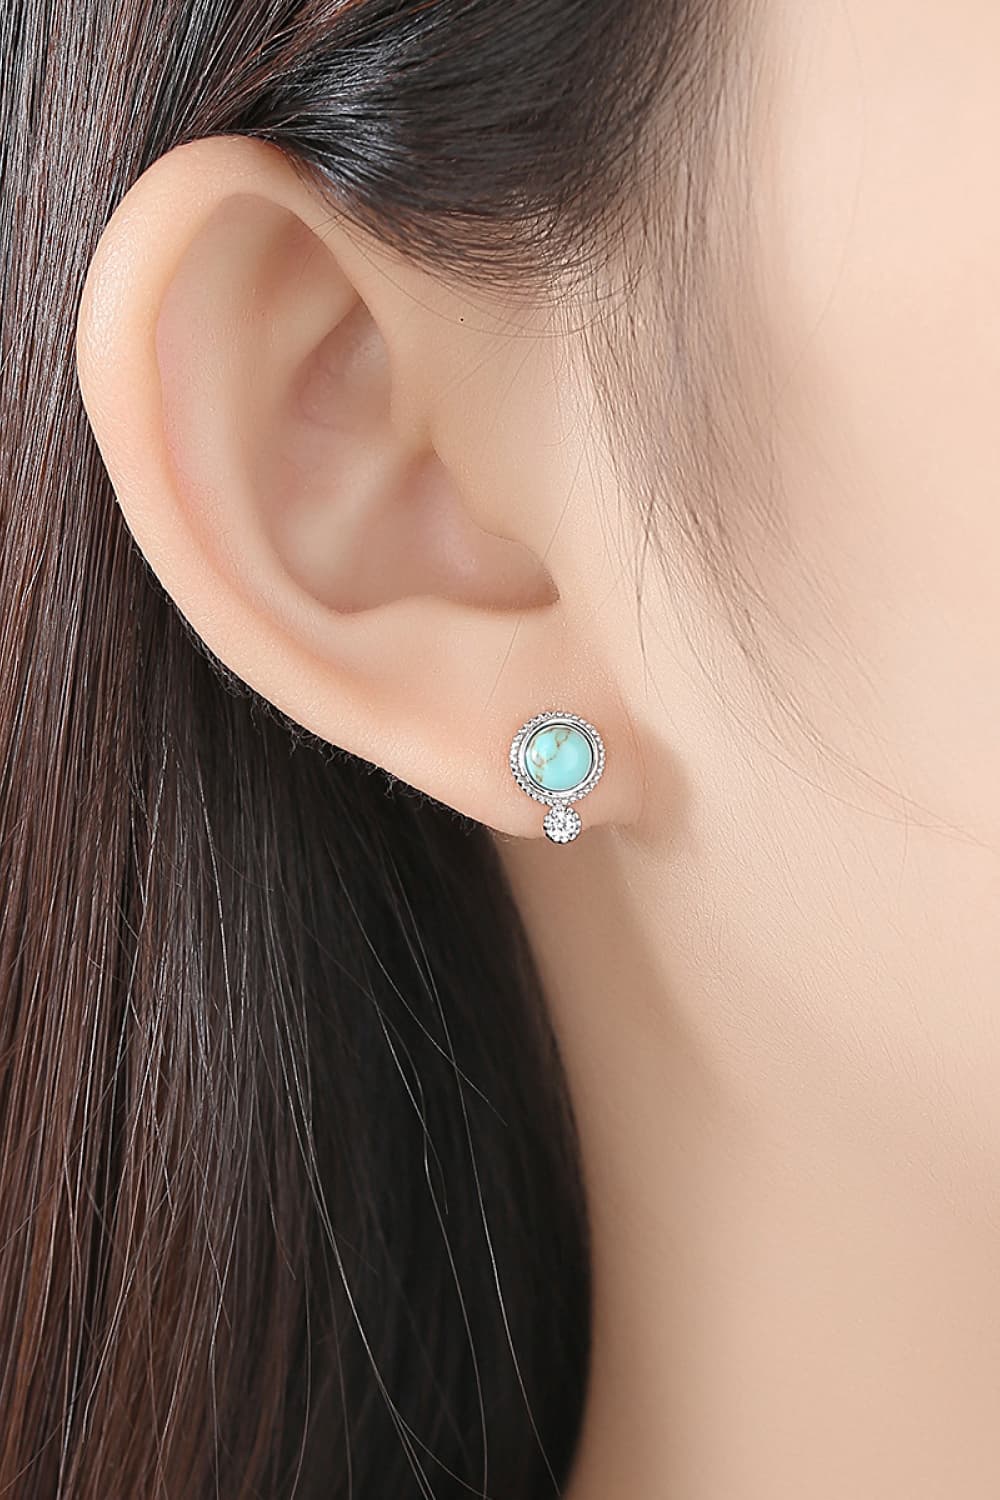 Tan Turquoise Platinum-Plated Earrings Sentient Beauty Fashions jewelry